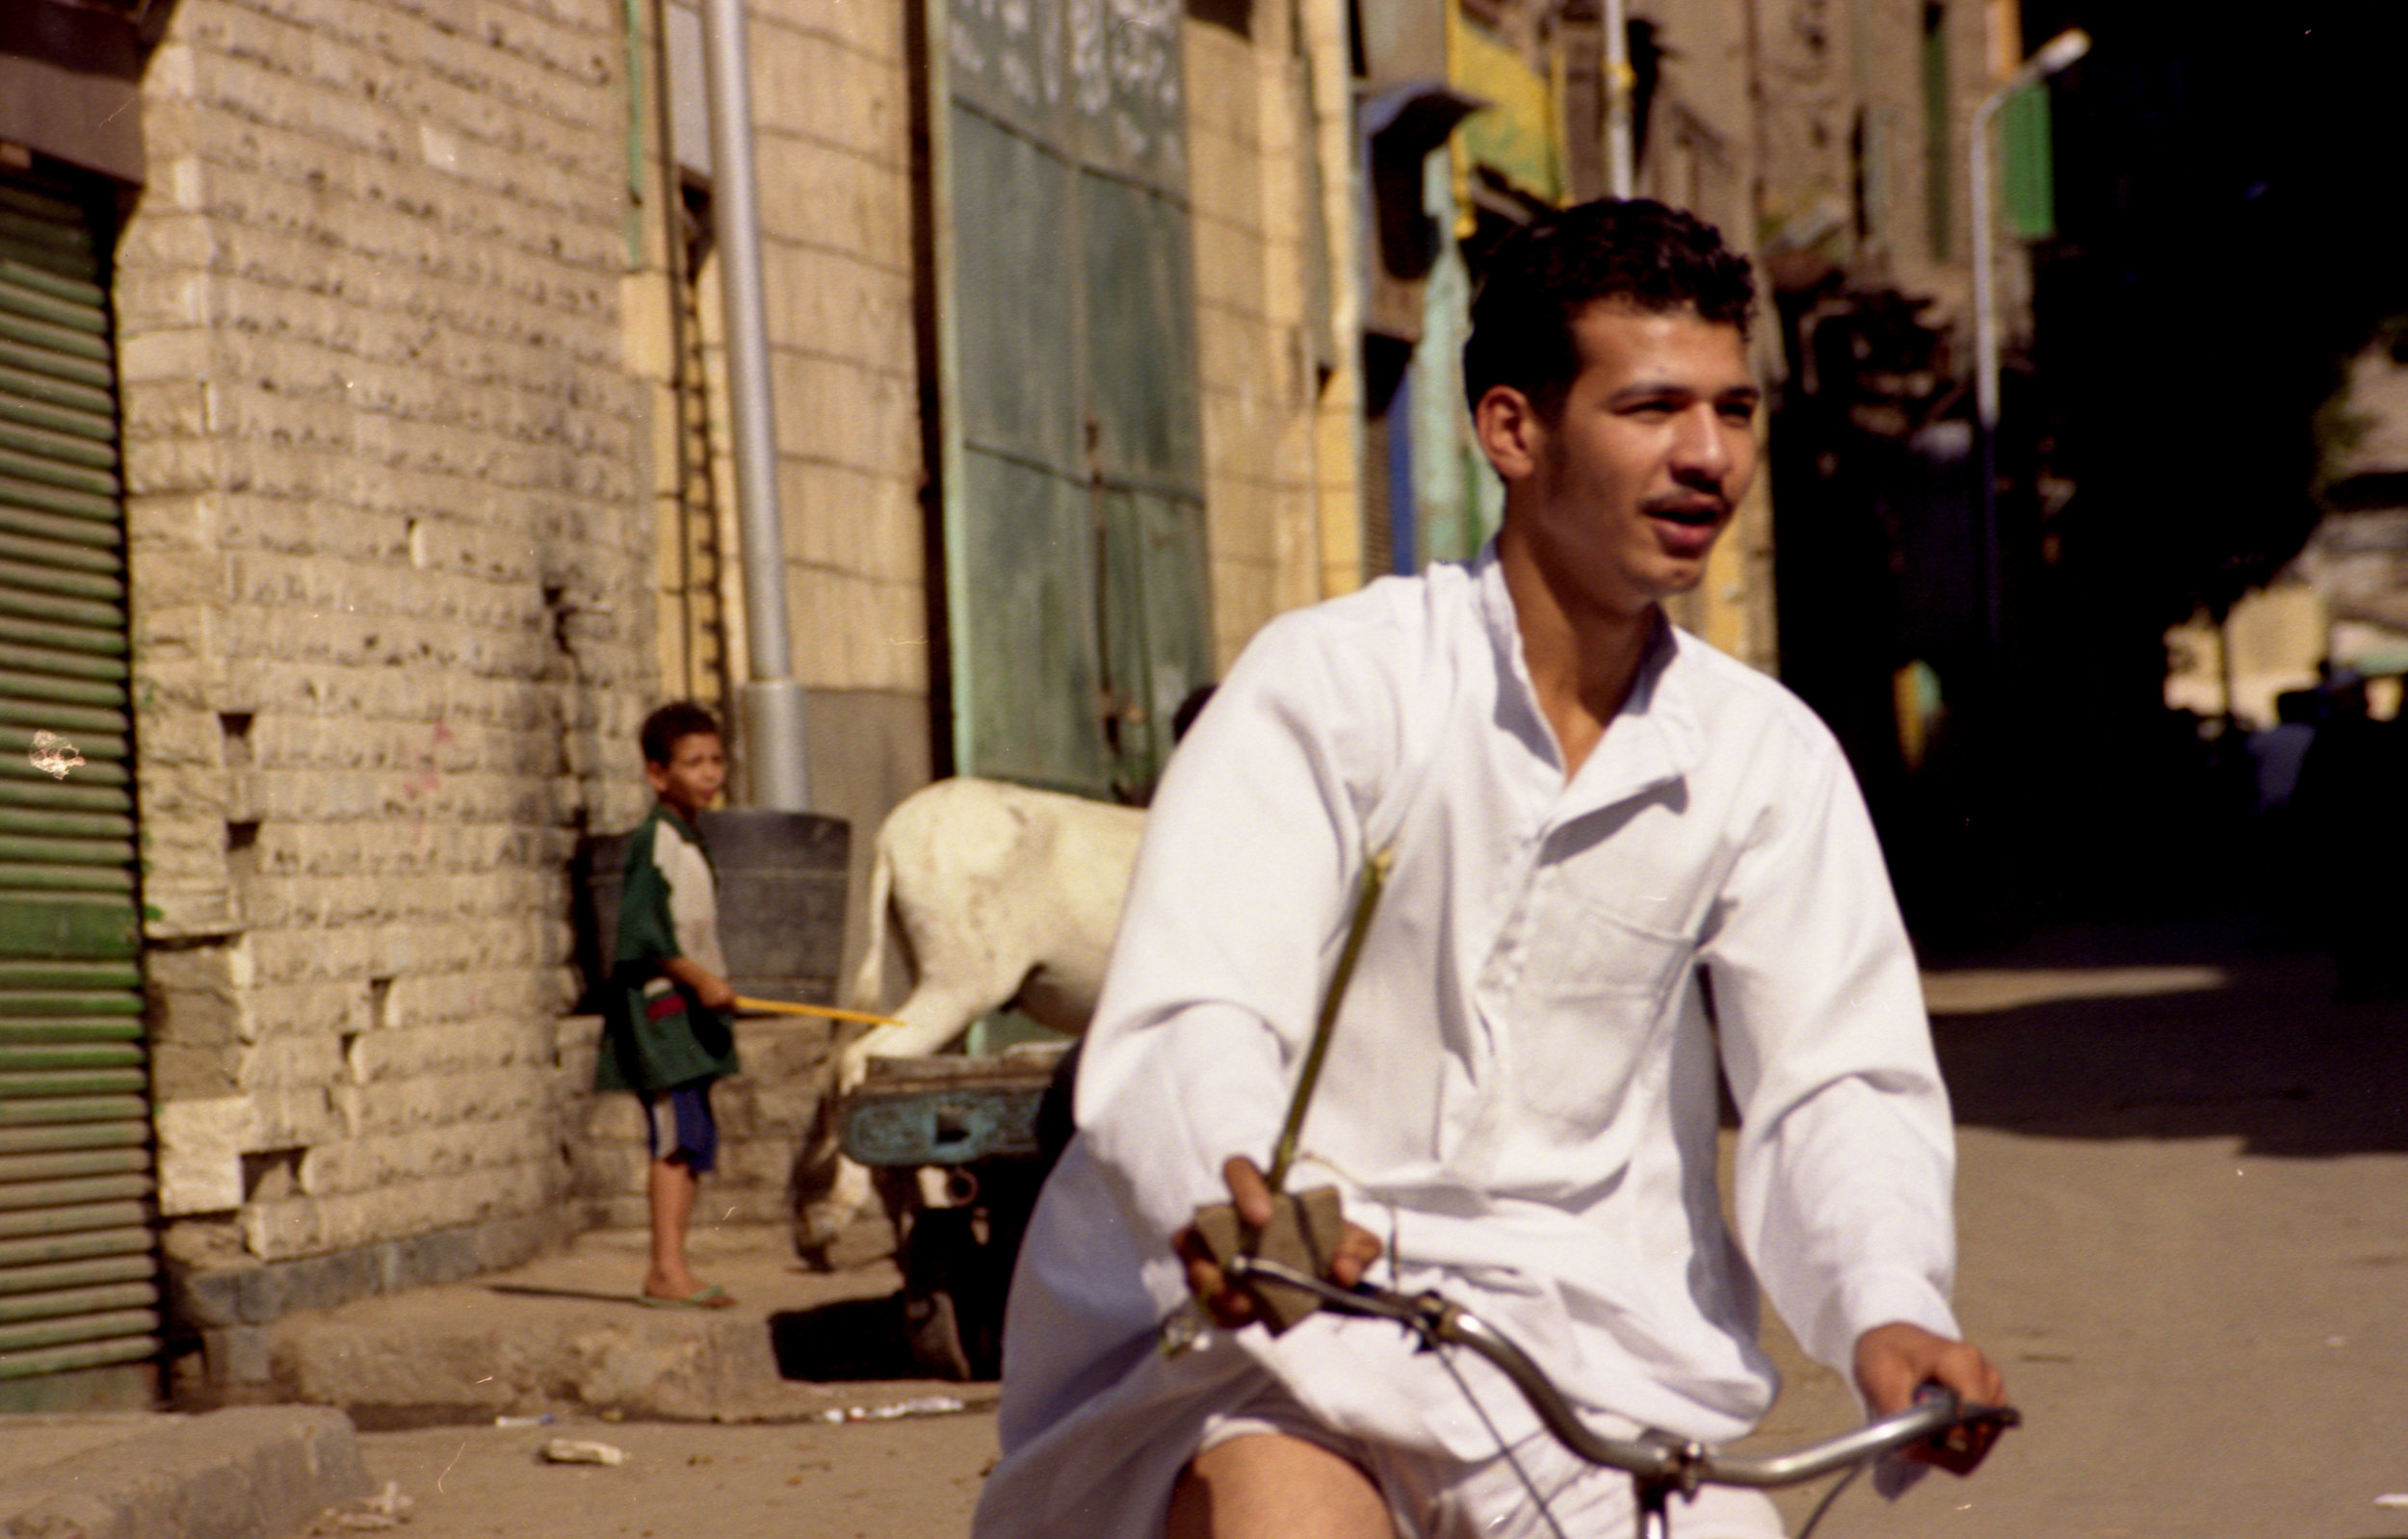 Young Man in White on Bicycle, Cairo, Egypt  4027W.jpg